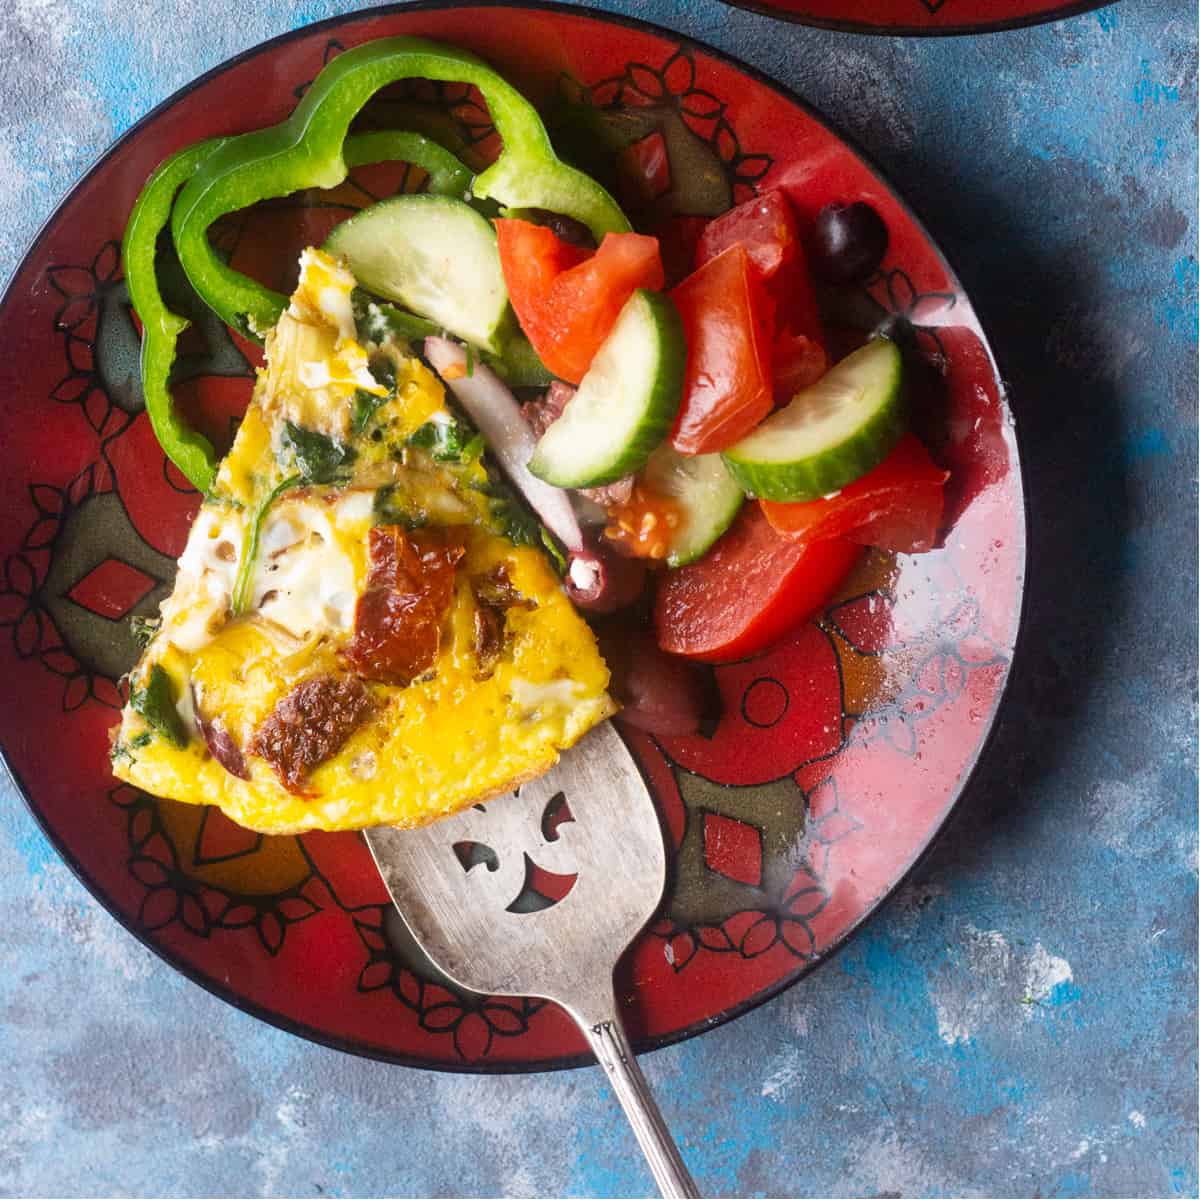 Ready in 20 minutes, this spinach omelette with a Mediterranean twist is perfect for breakfast. It's packed with vegetables and flavor, and is very easy to make.
